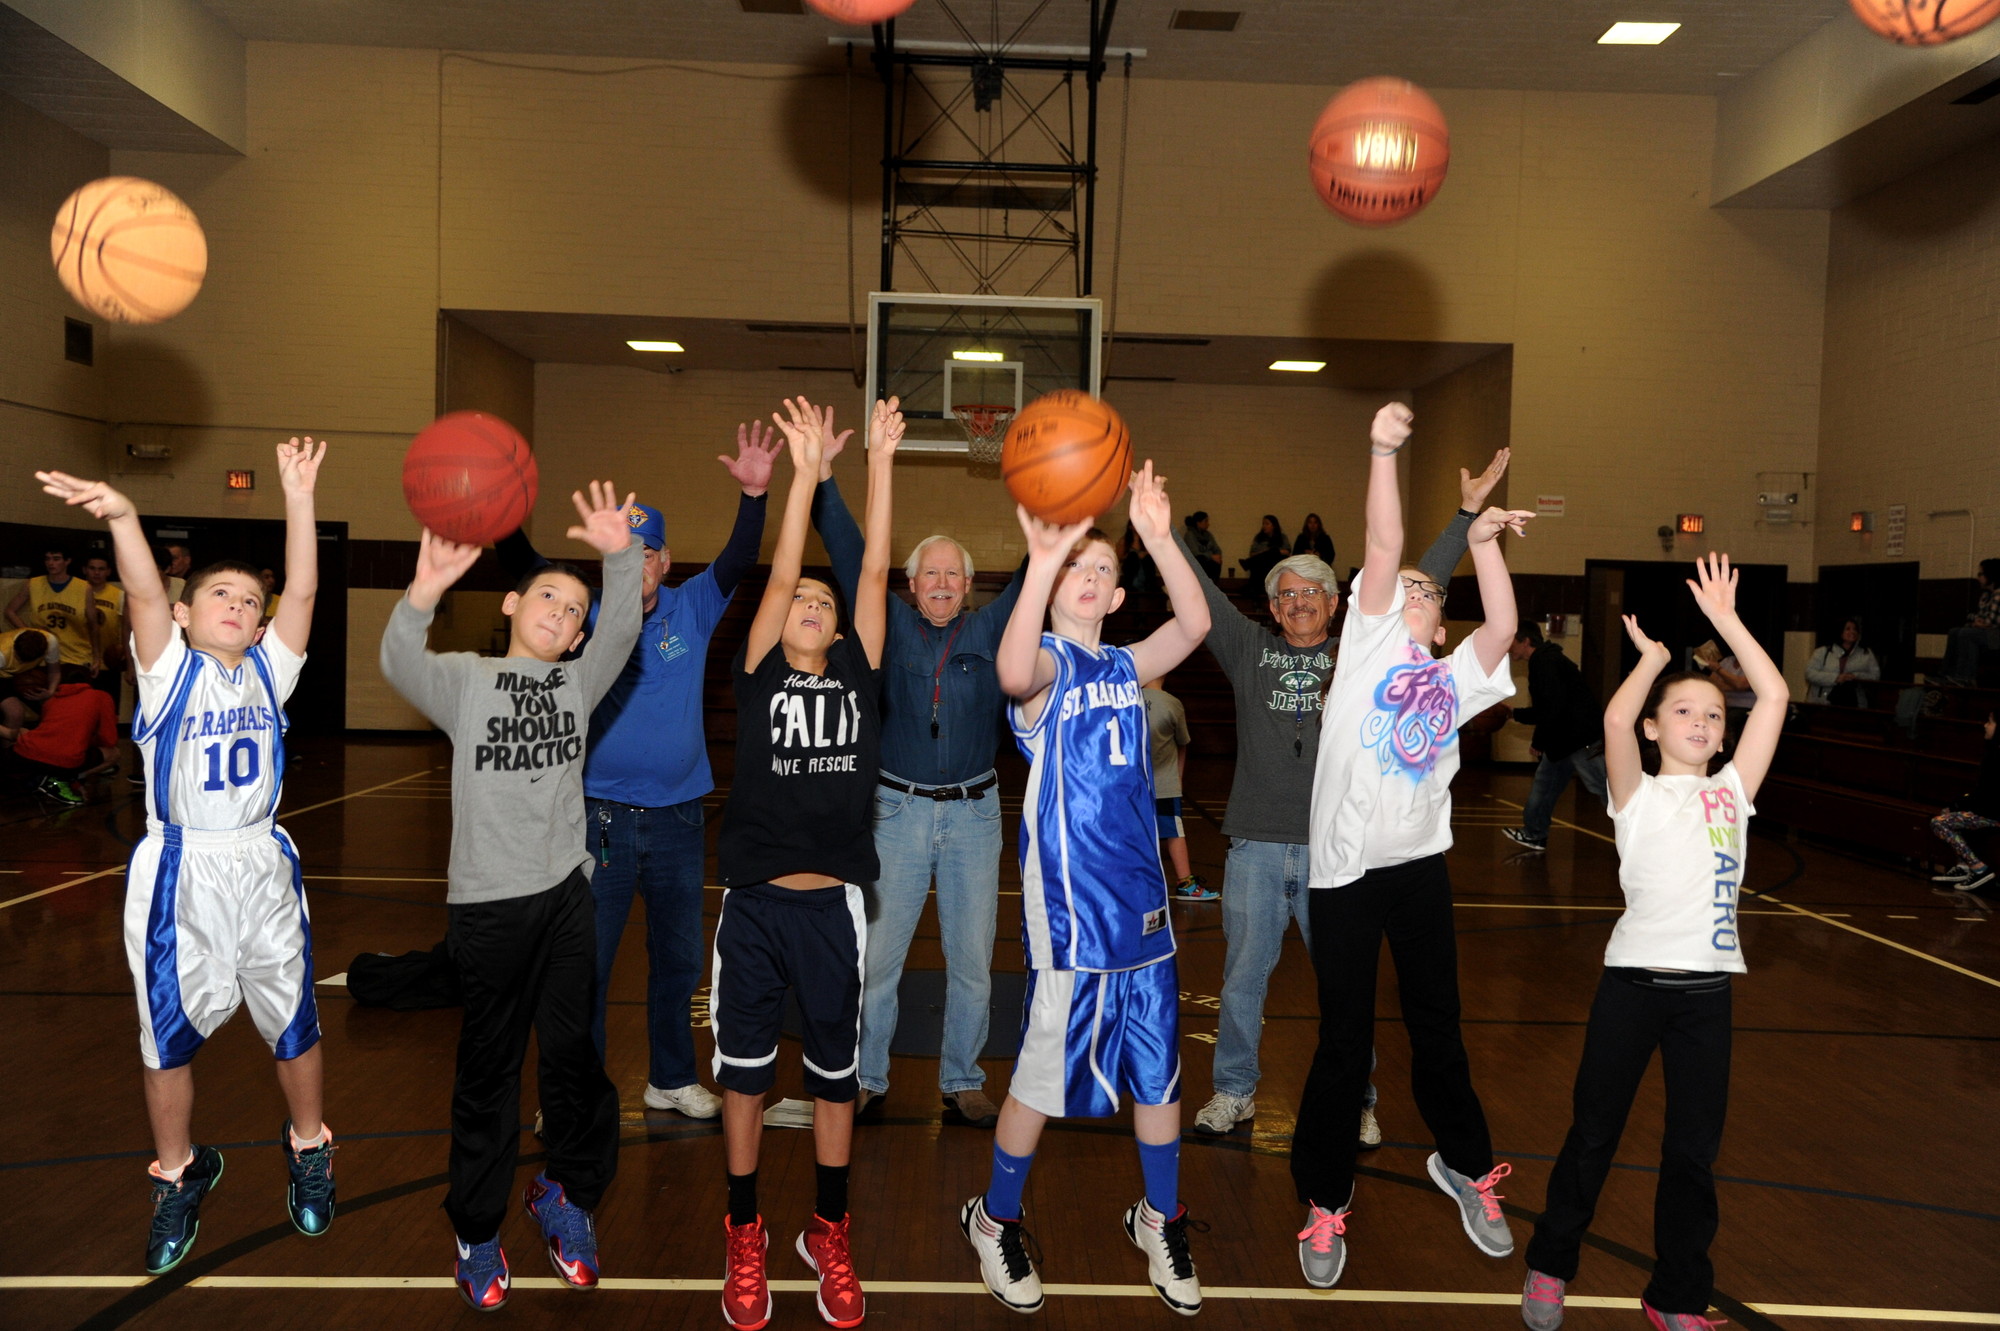 Nicholas Giardino, 9, far left, Jordan Chalmers, 10, Tyler Luciano, 12, Brendan Wilkowski, 11, Kerry Clark, 11, and Lindsay Solenski, 9, were among the winners of the Pope Pius XII Knights of Columbus annual free throw contest last Saturday at St. Raphael’s Parish. Behind them, event organizers John Devany, partially obscured at left, Paul Wissert and Alan Bacci cheered them on.